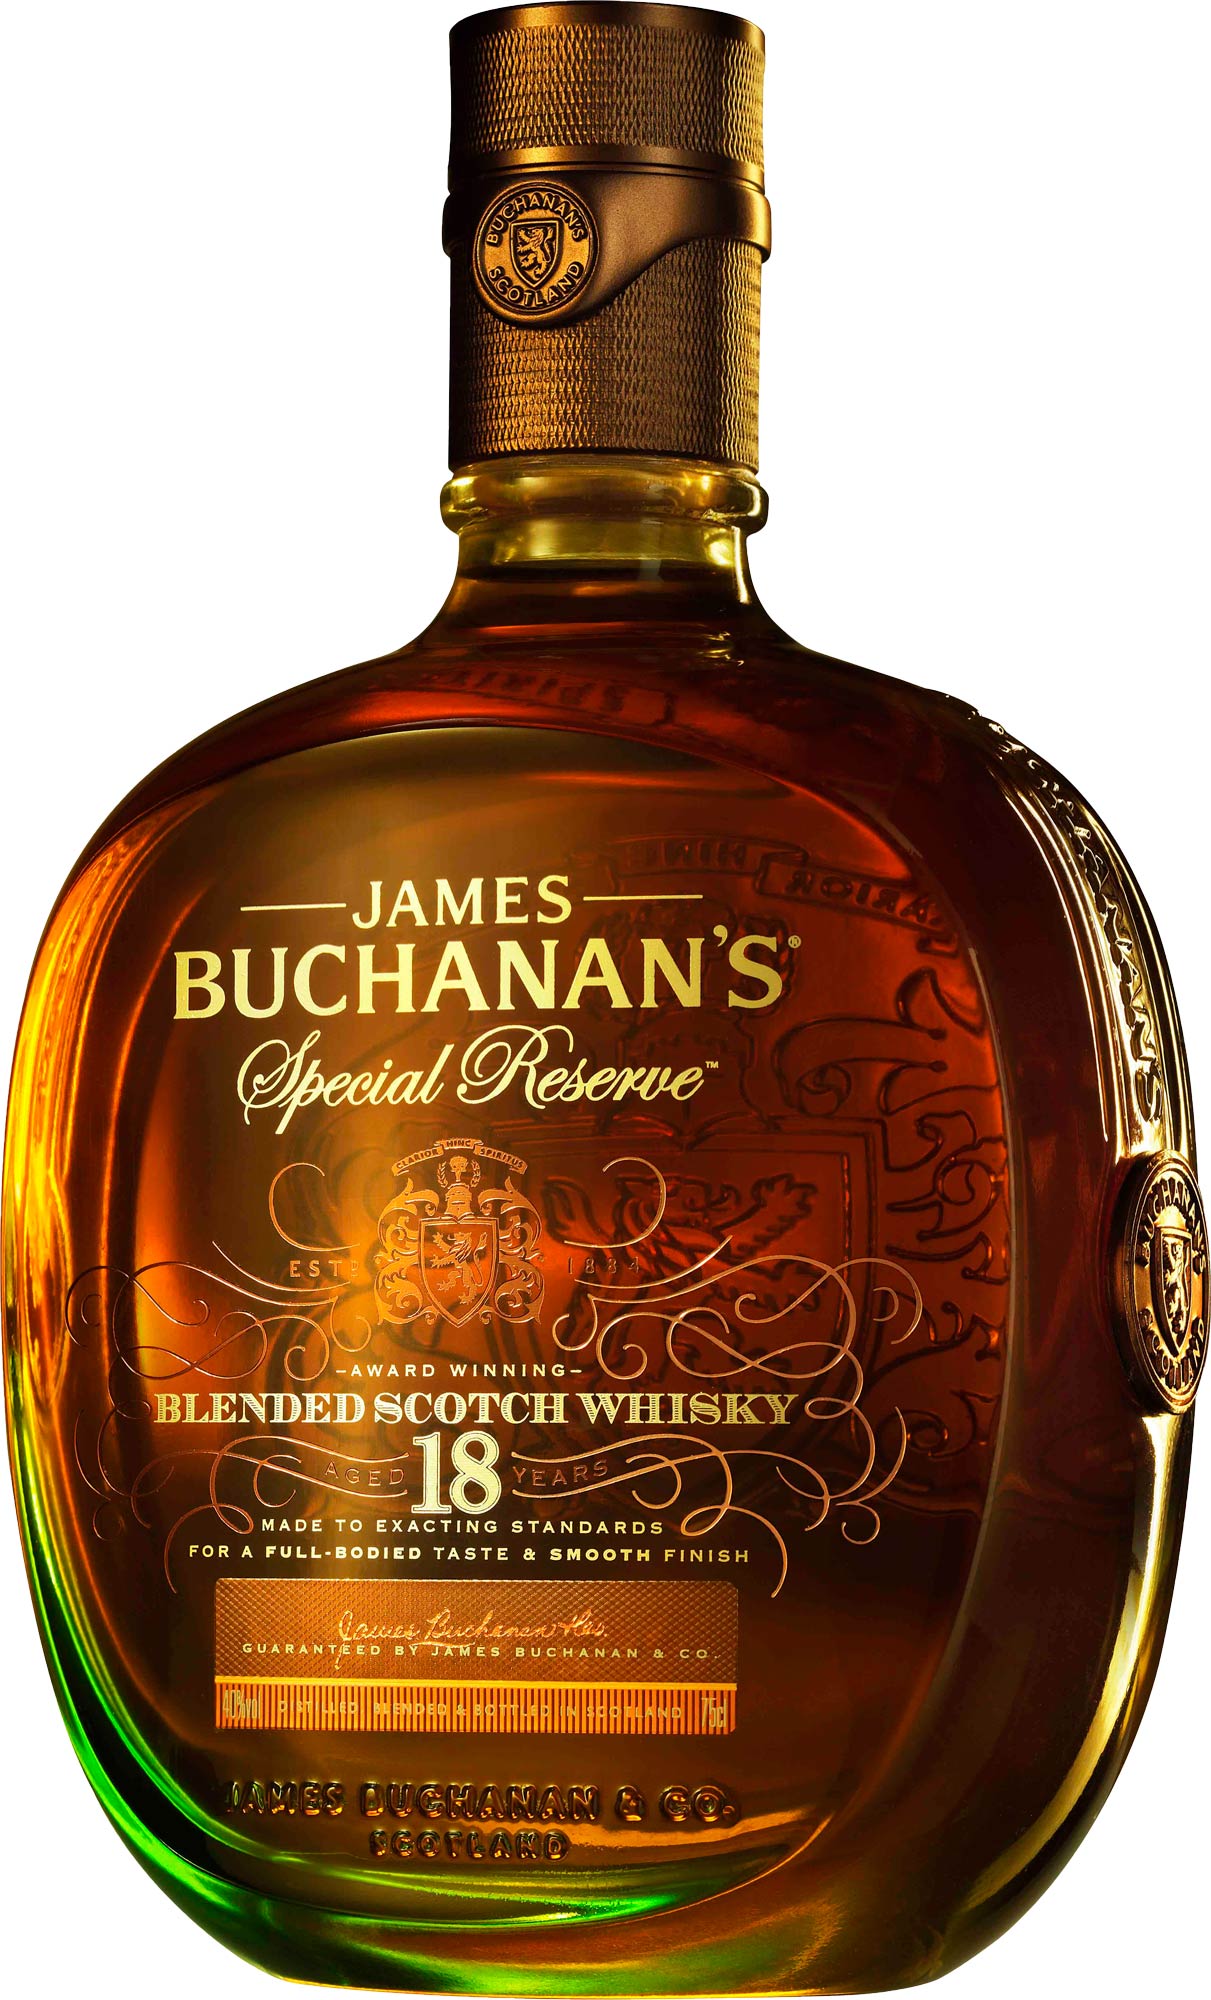 Buchanans Special Reserve 18 Year Old Scotch Whisky